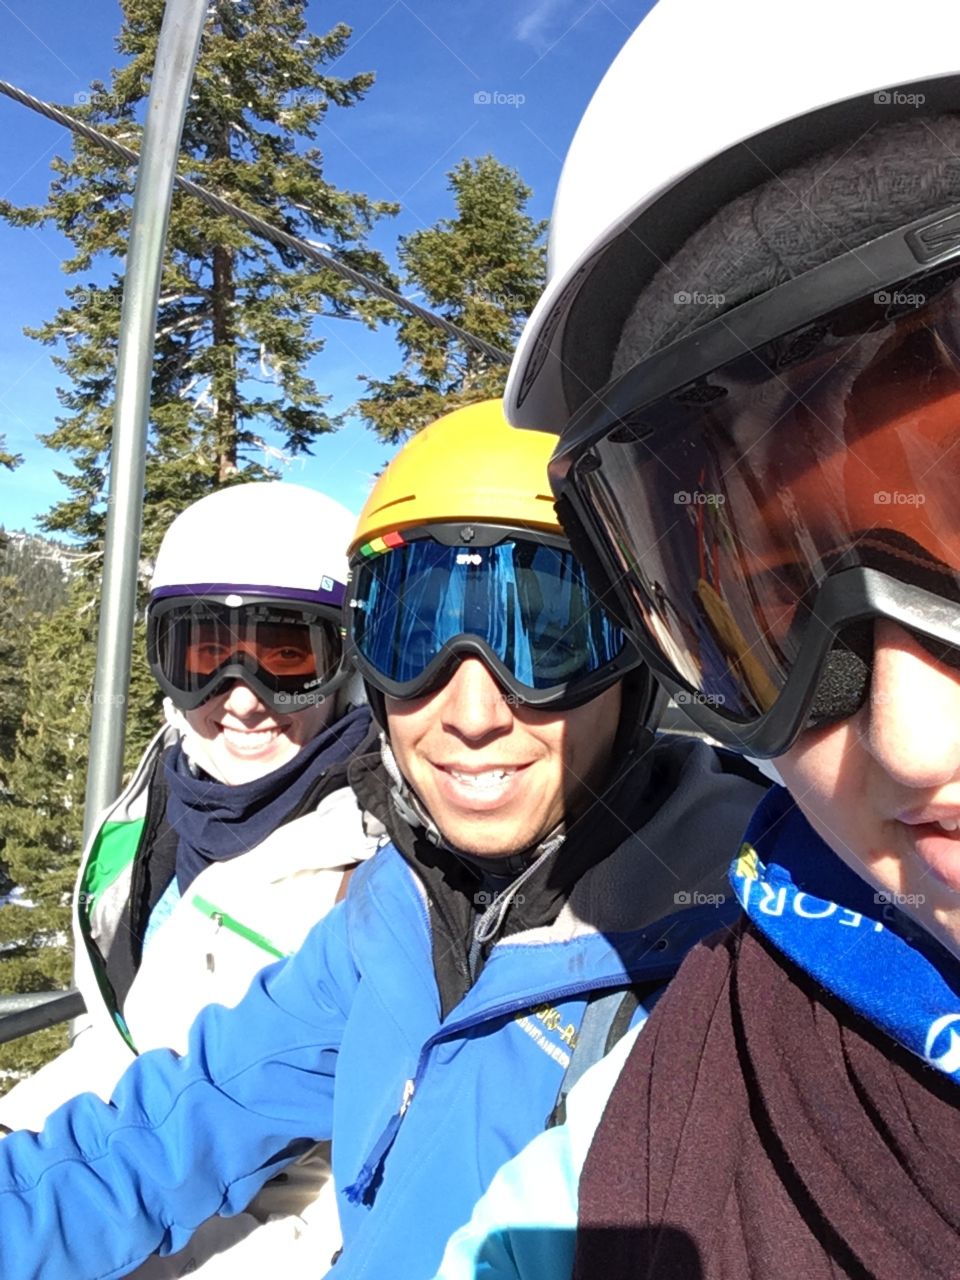 Three people on a chair lift with helmets and ski masks on